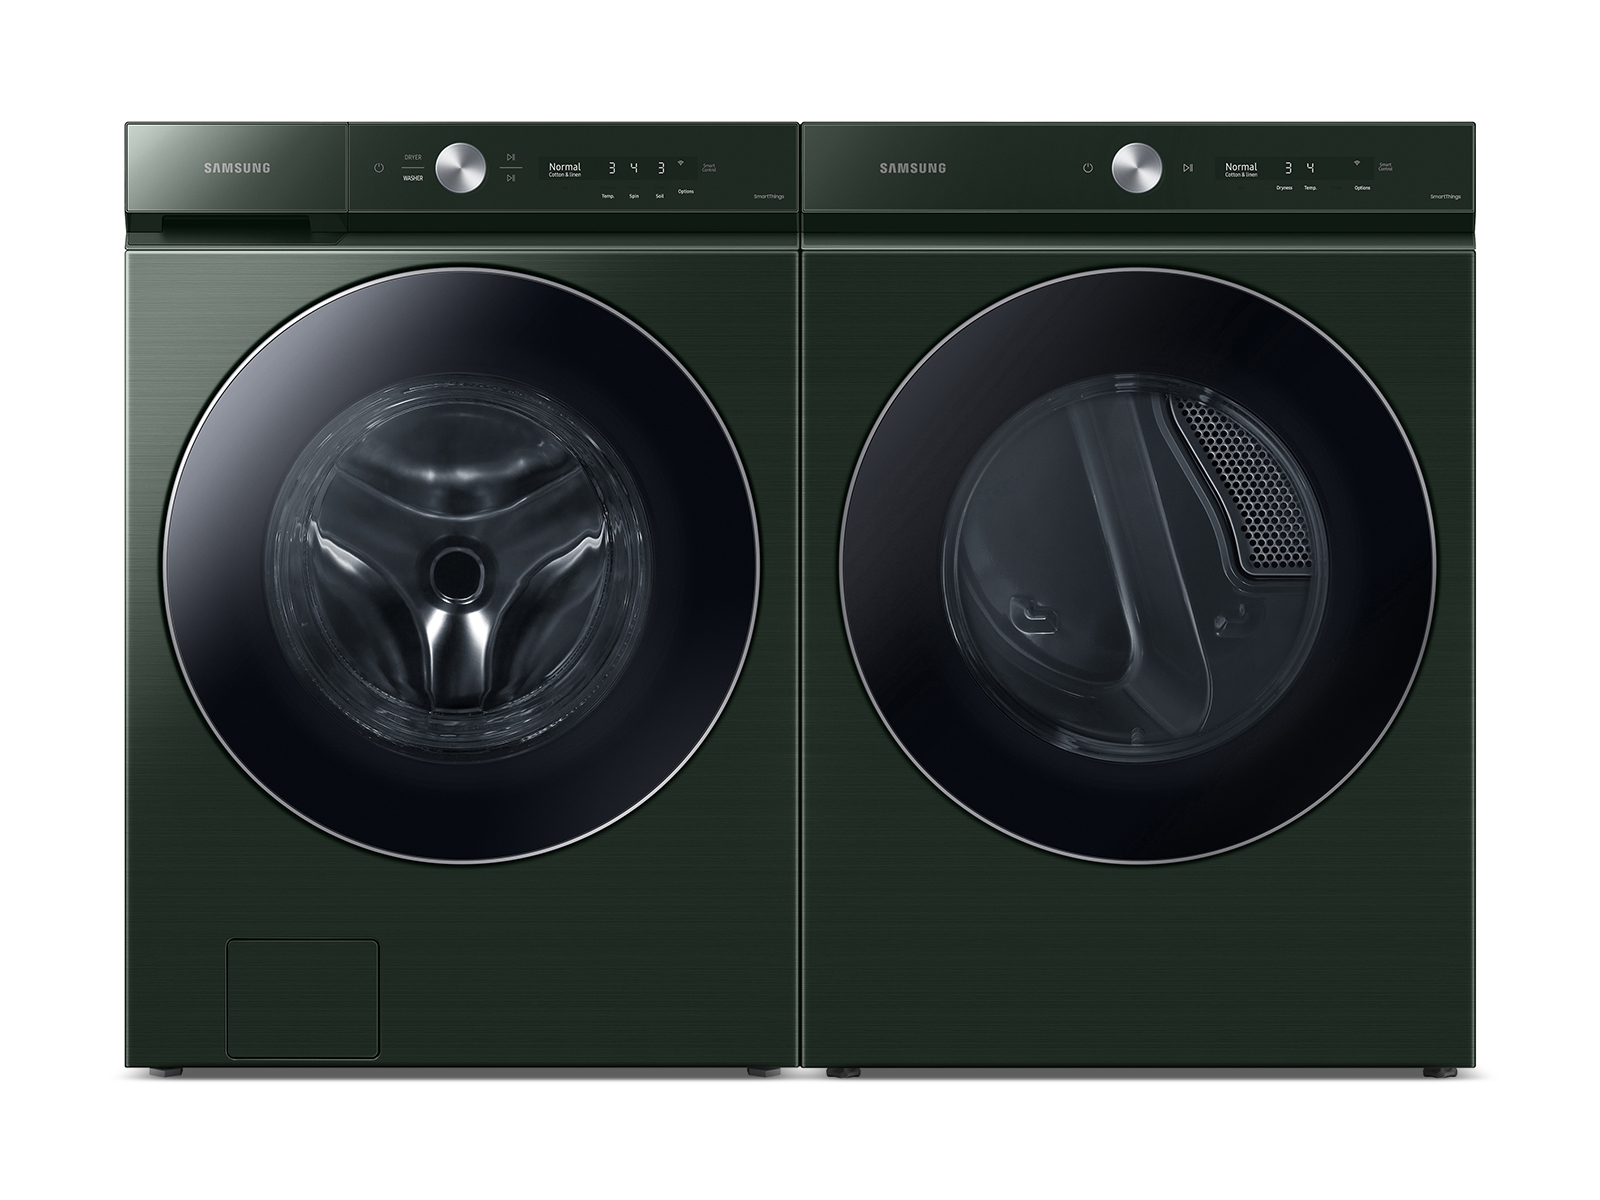 Samsung Bespoke Ultra Capacity Front Load Washer and Electric Dryer in Forest in Green(BNDL-1665611426611)